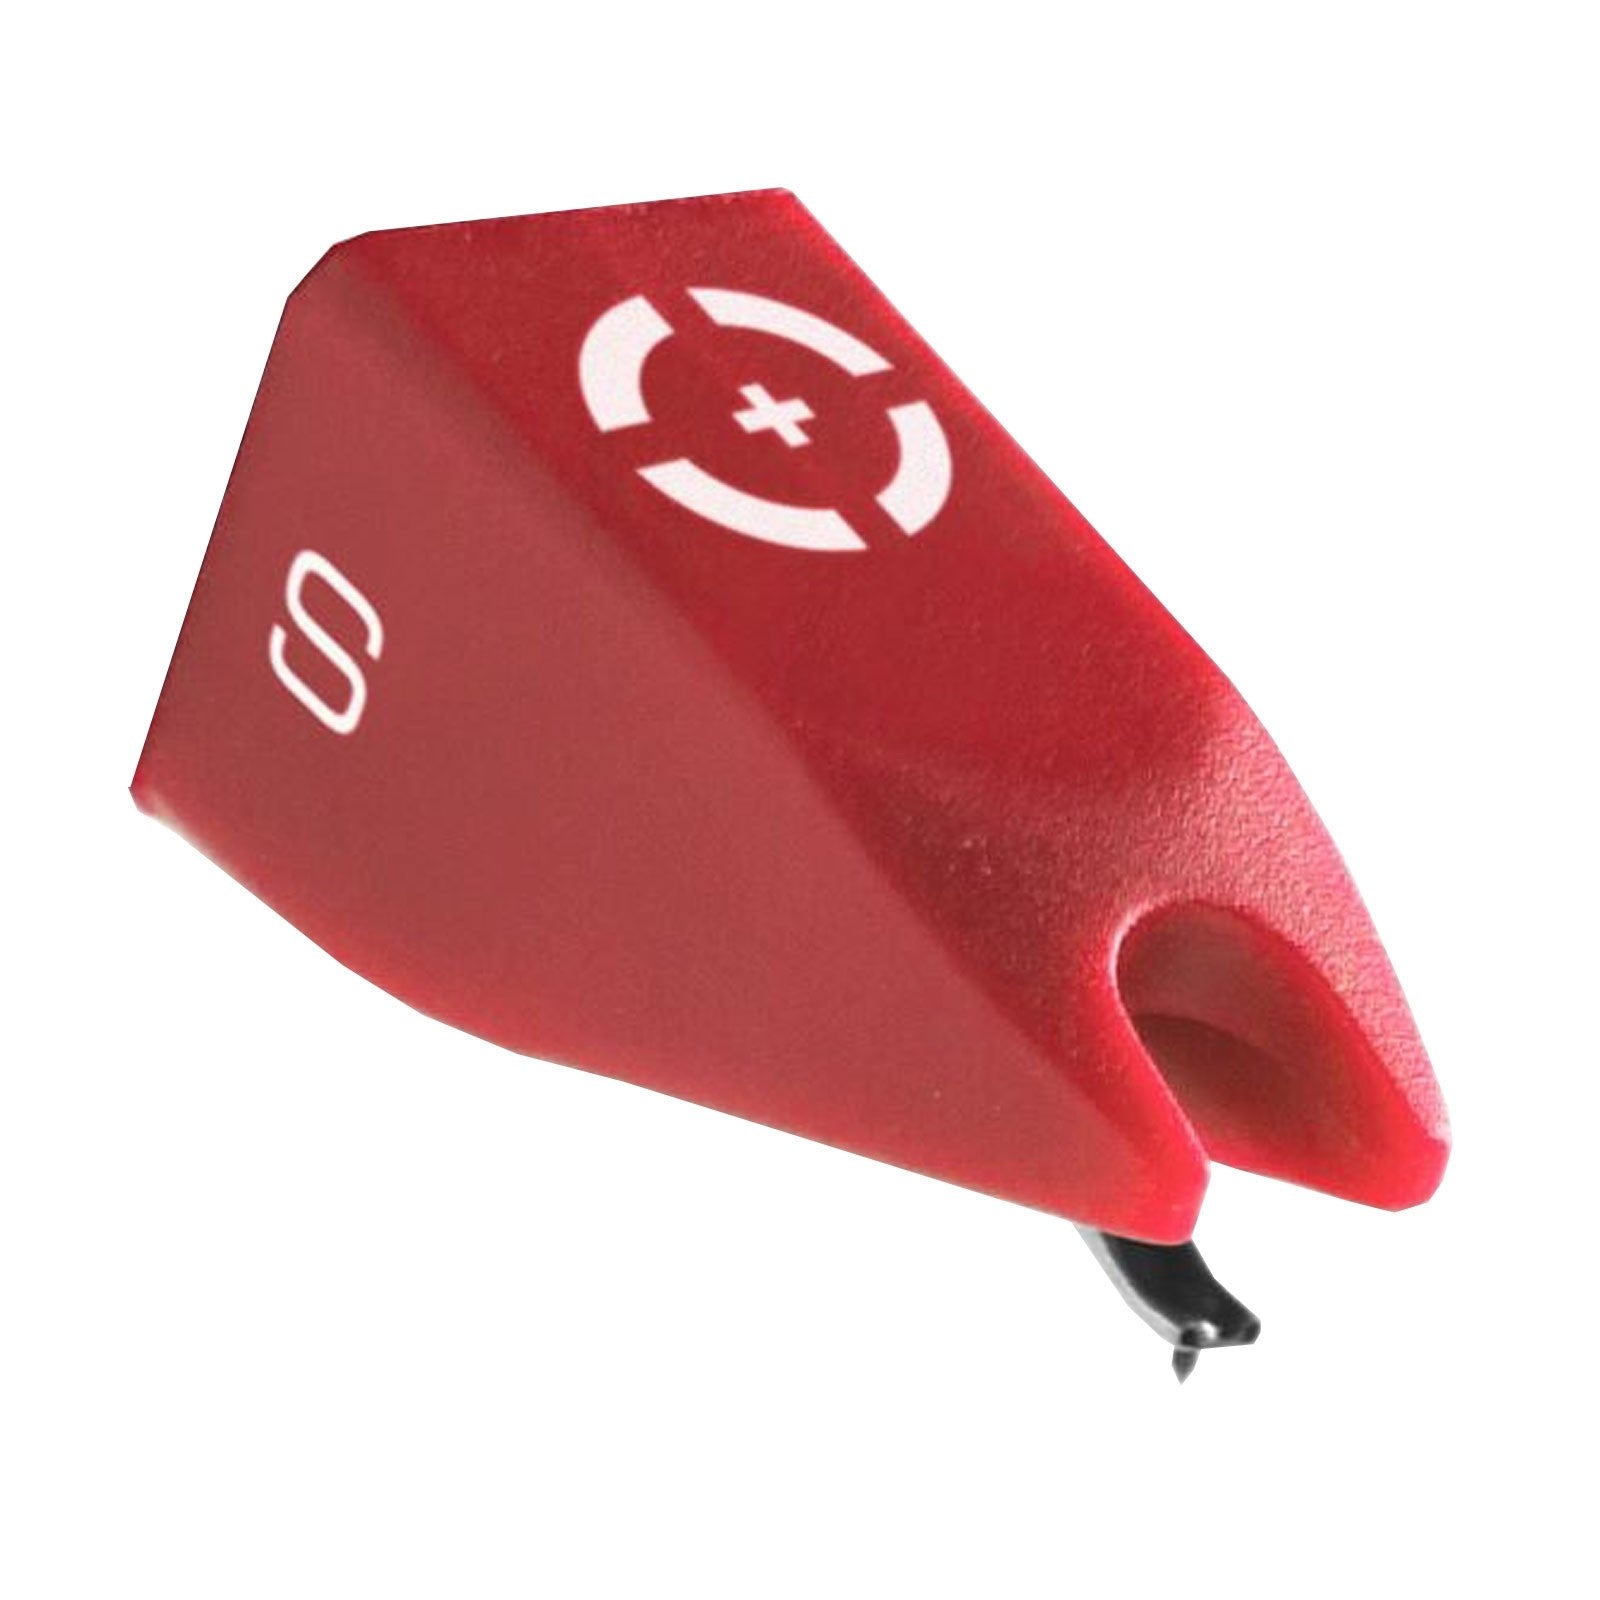 Ortofon DigiTrack Replacement Stylus - Red (Open Box) - Hollywood DJ